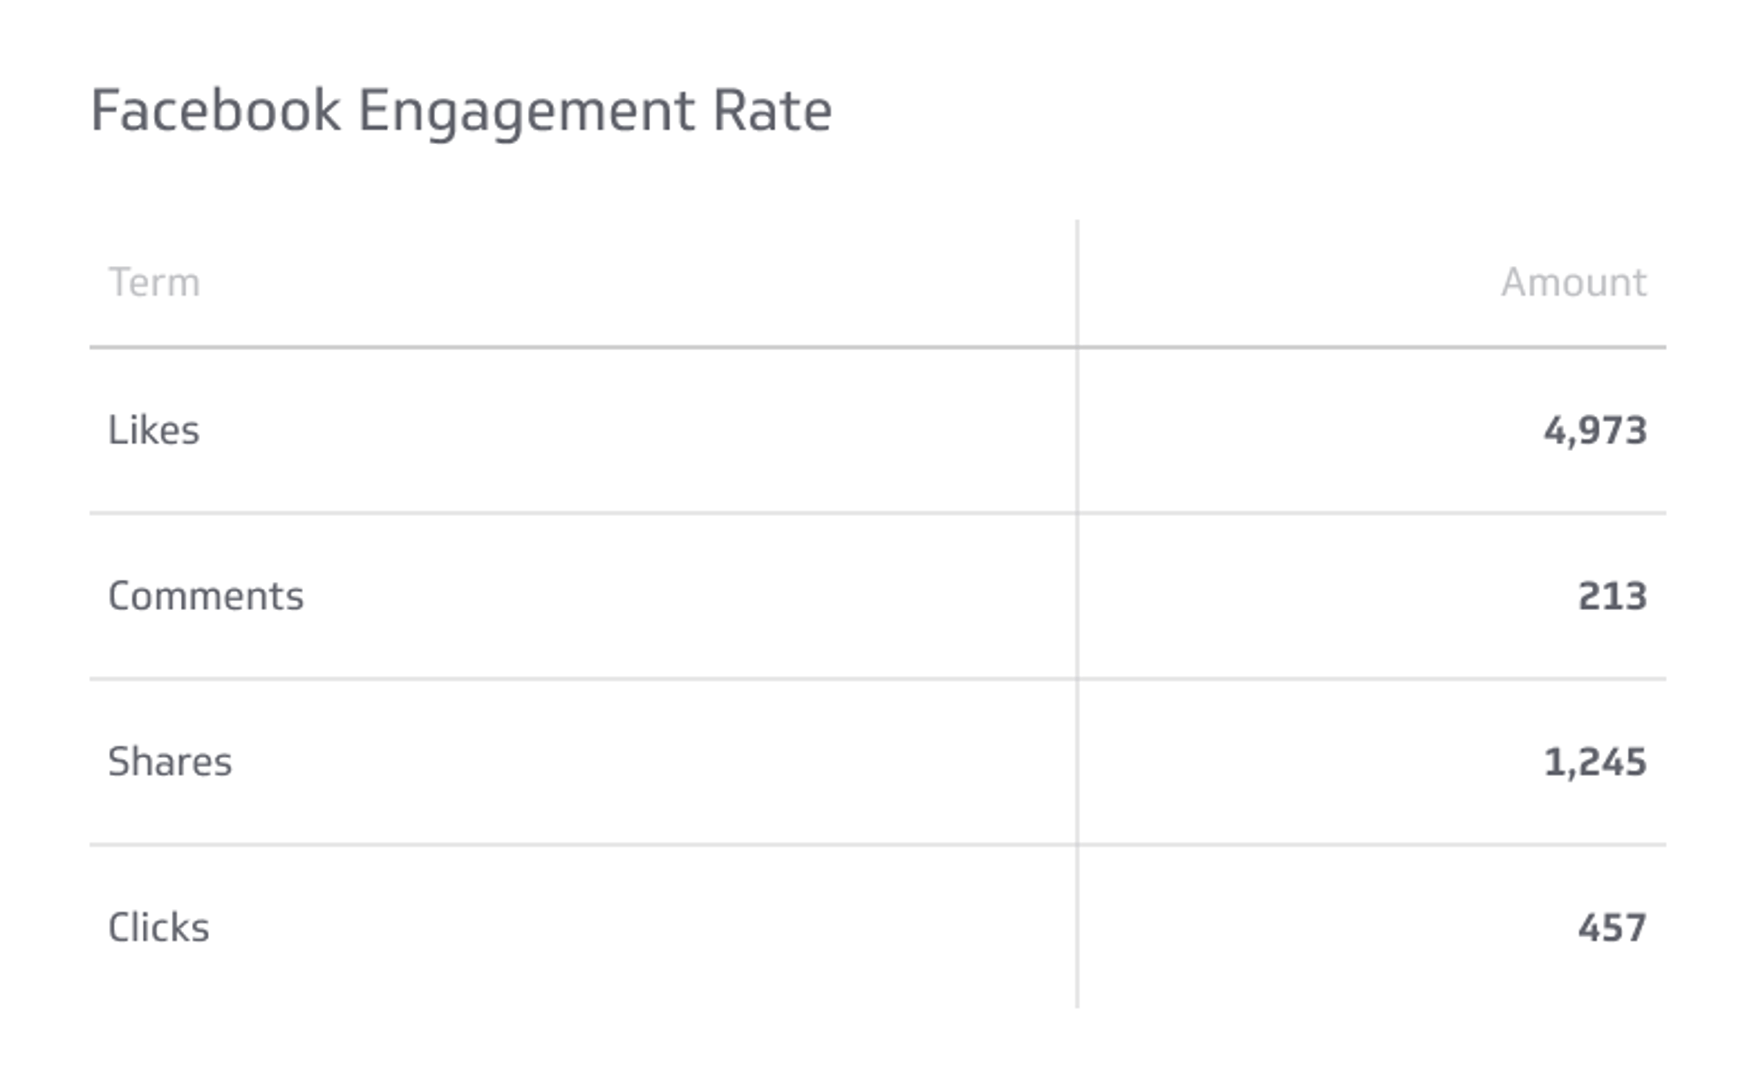 Related KPI Examples - Facebook Engagement Rate Metric